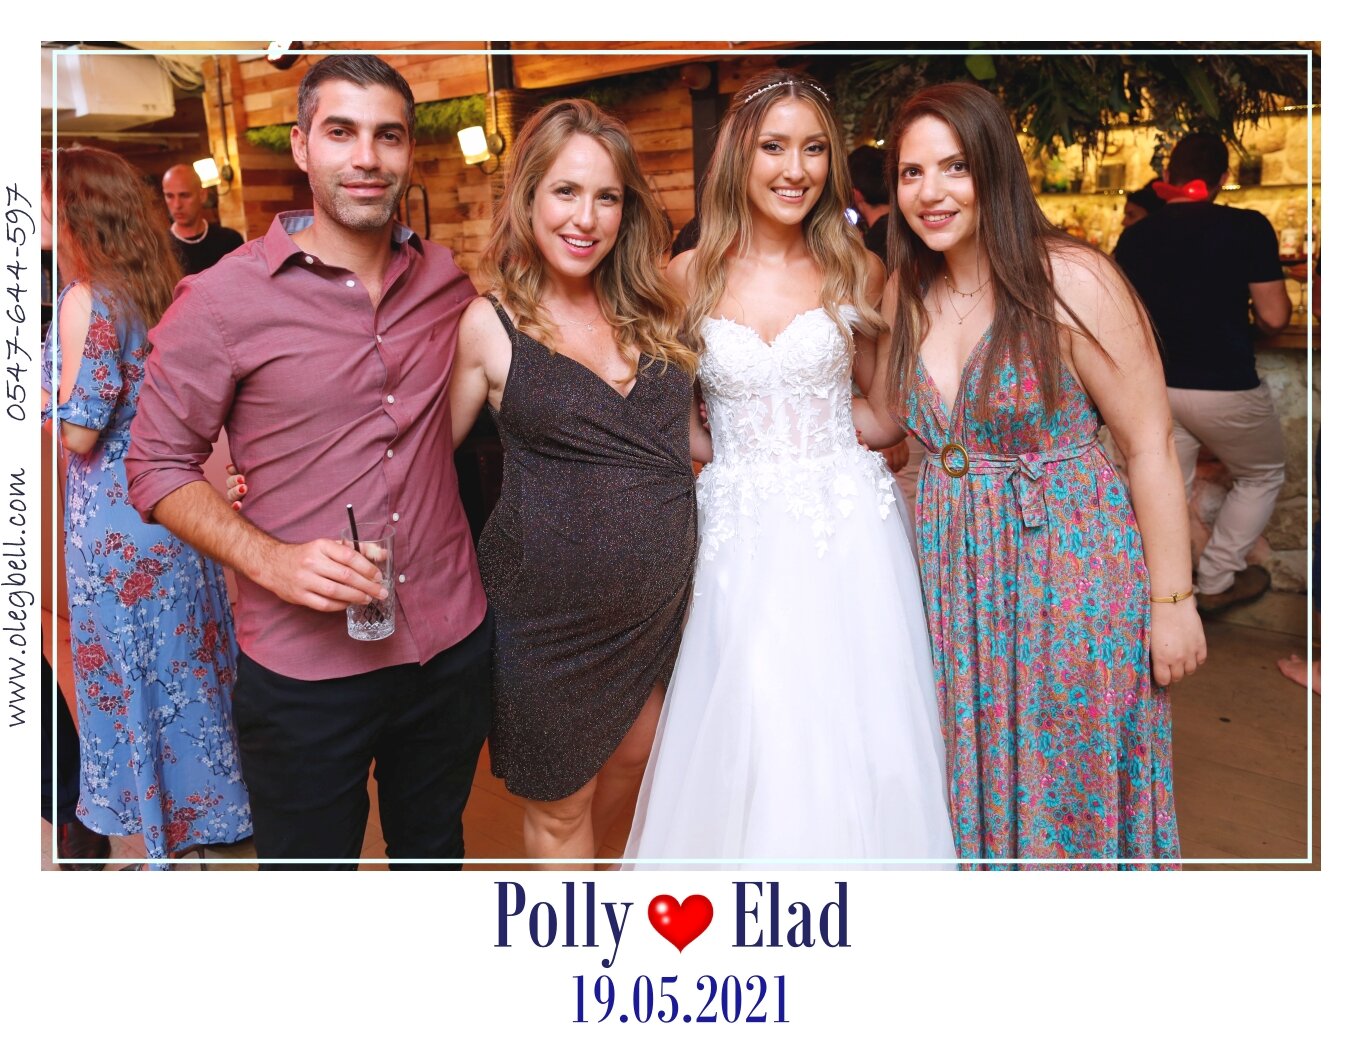 POLLY_AND_ELAD_WD_MG_SITE_036.JPG